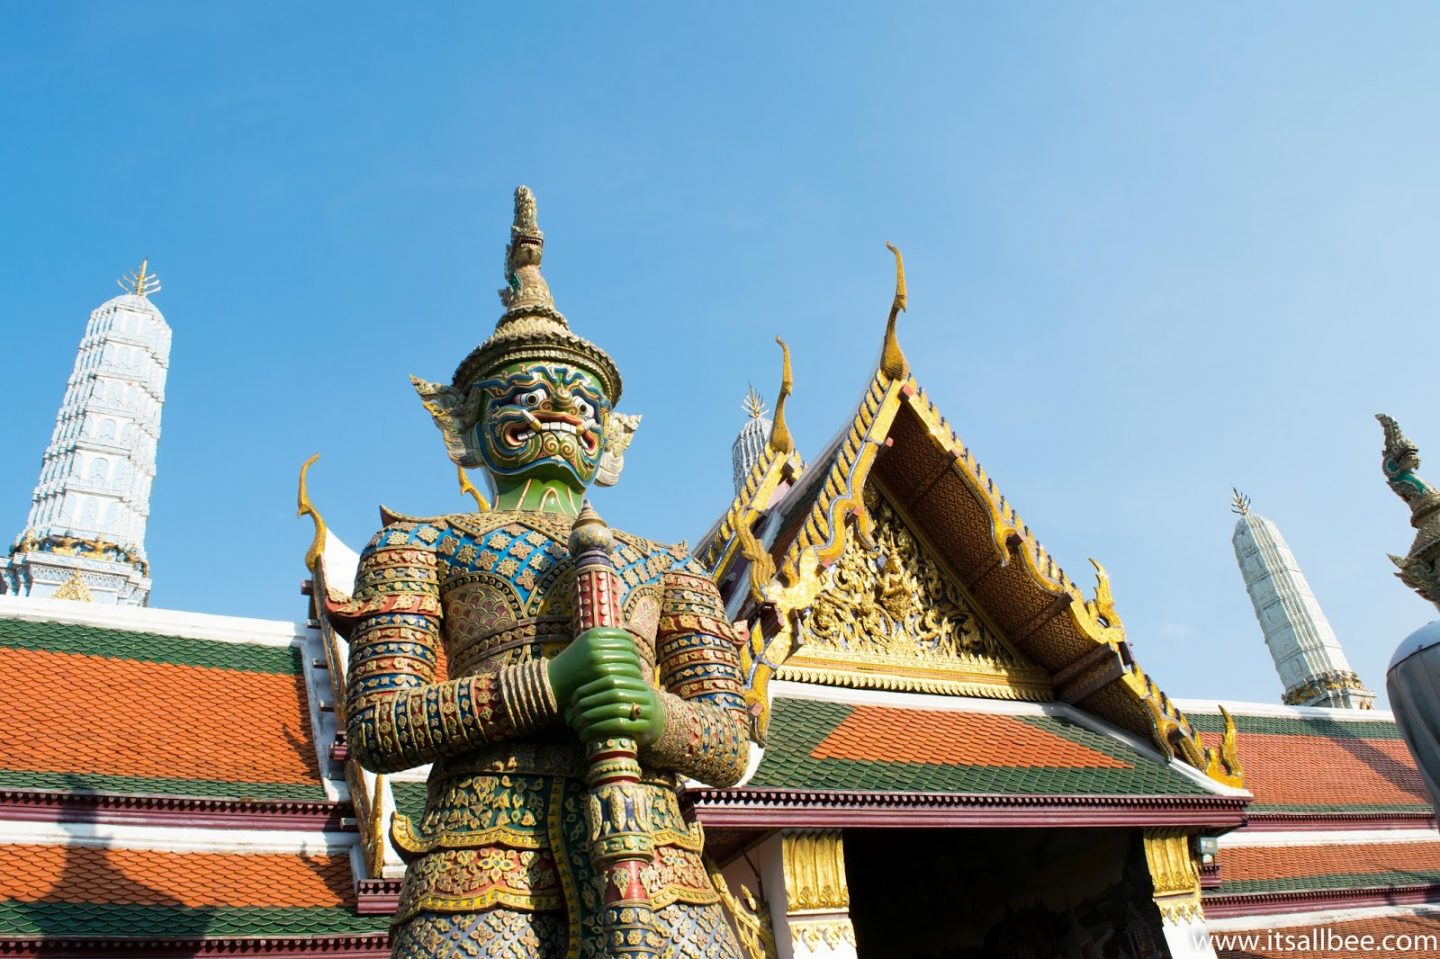 The Perfect 3 Weeks In Thailand Itinerary - Things to do in Thailand for 3 weeks 